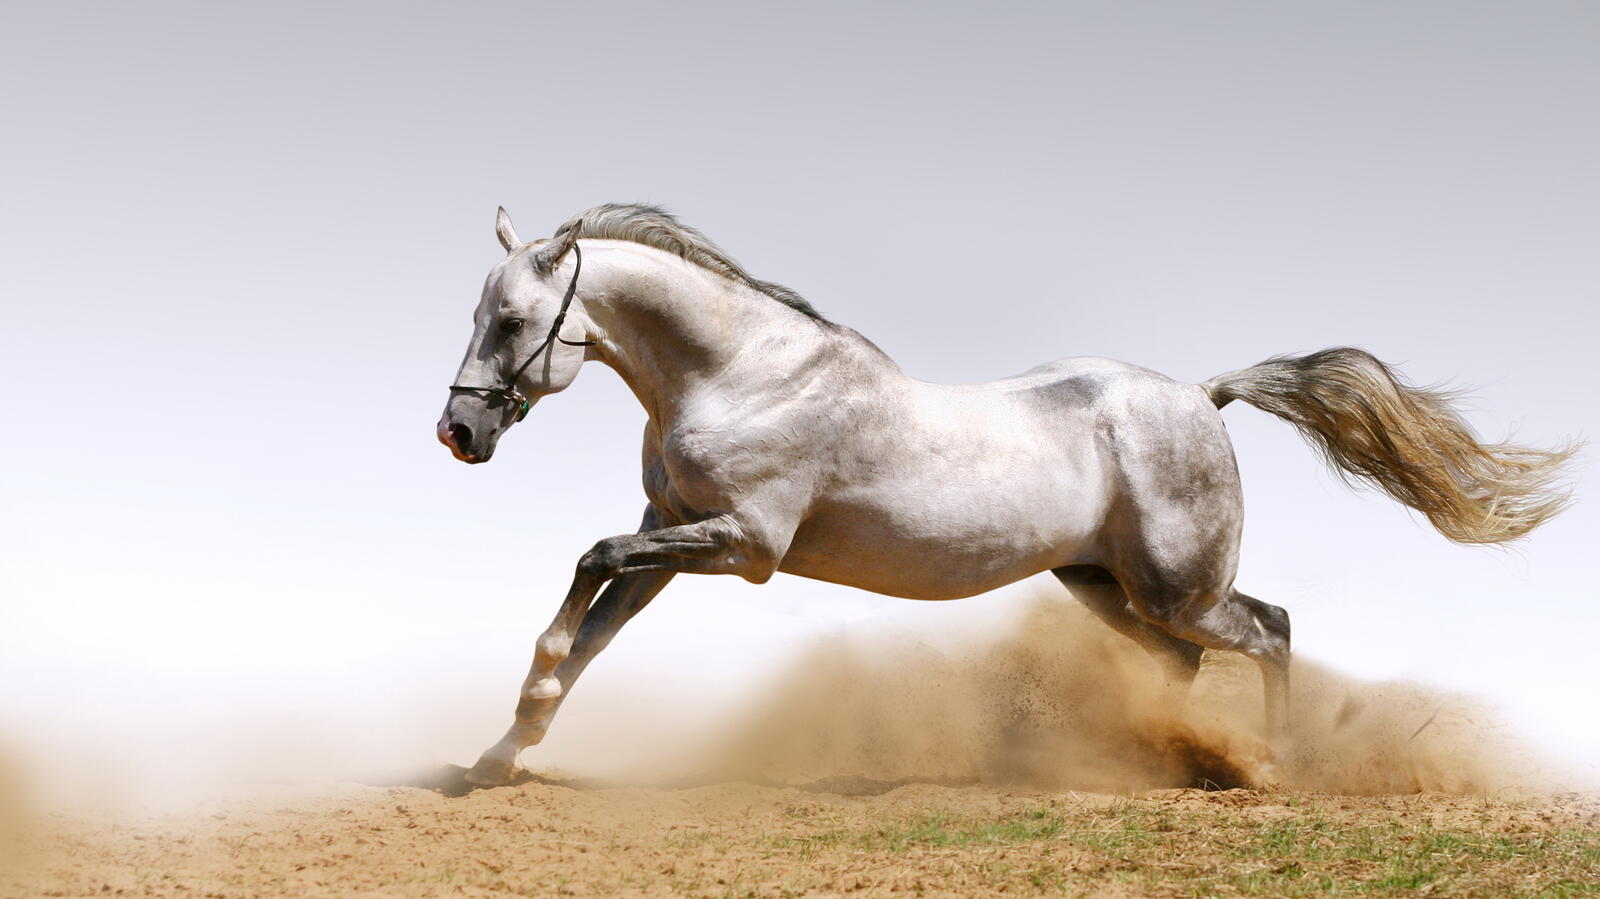 Wallpapers horse download sand on the desktop